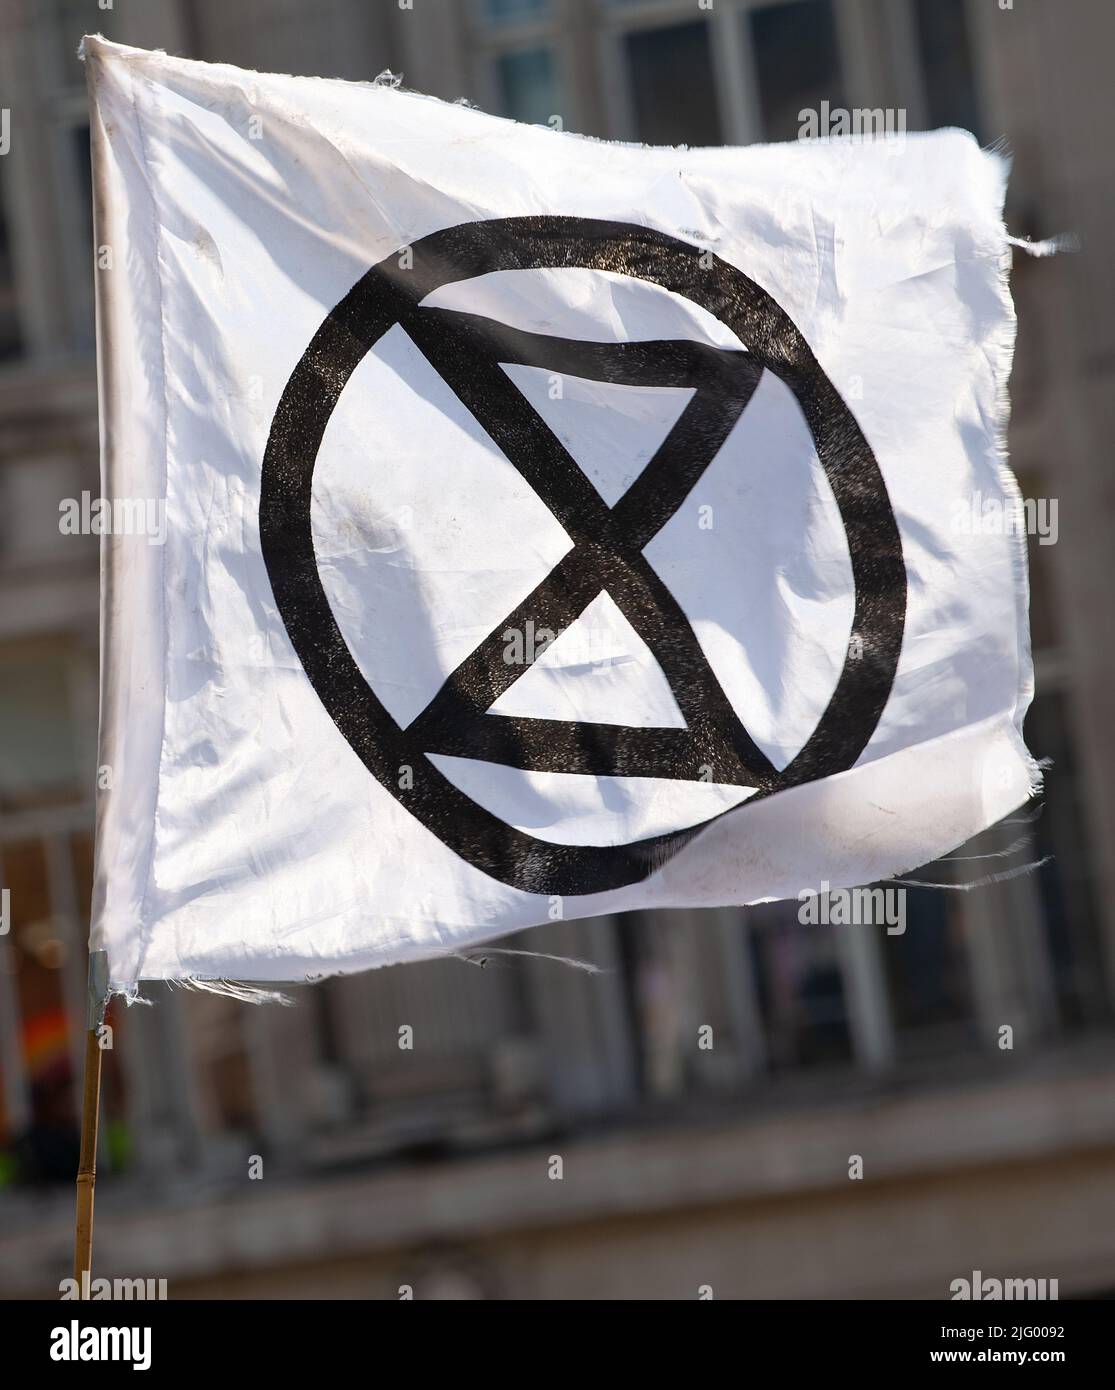 Climate change protest signs at the Extinction Rebellion demonstration, London, in protest of world climate breakdown and ecological collapse. Stock Photo